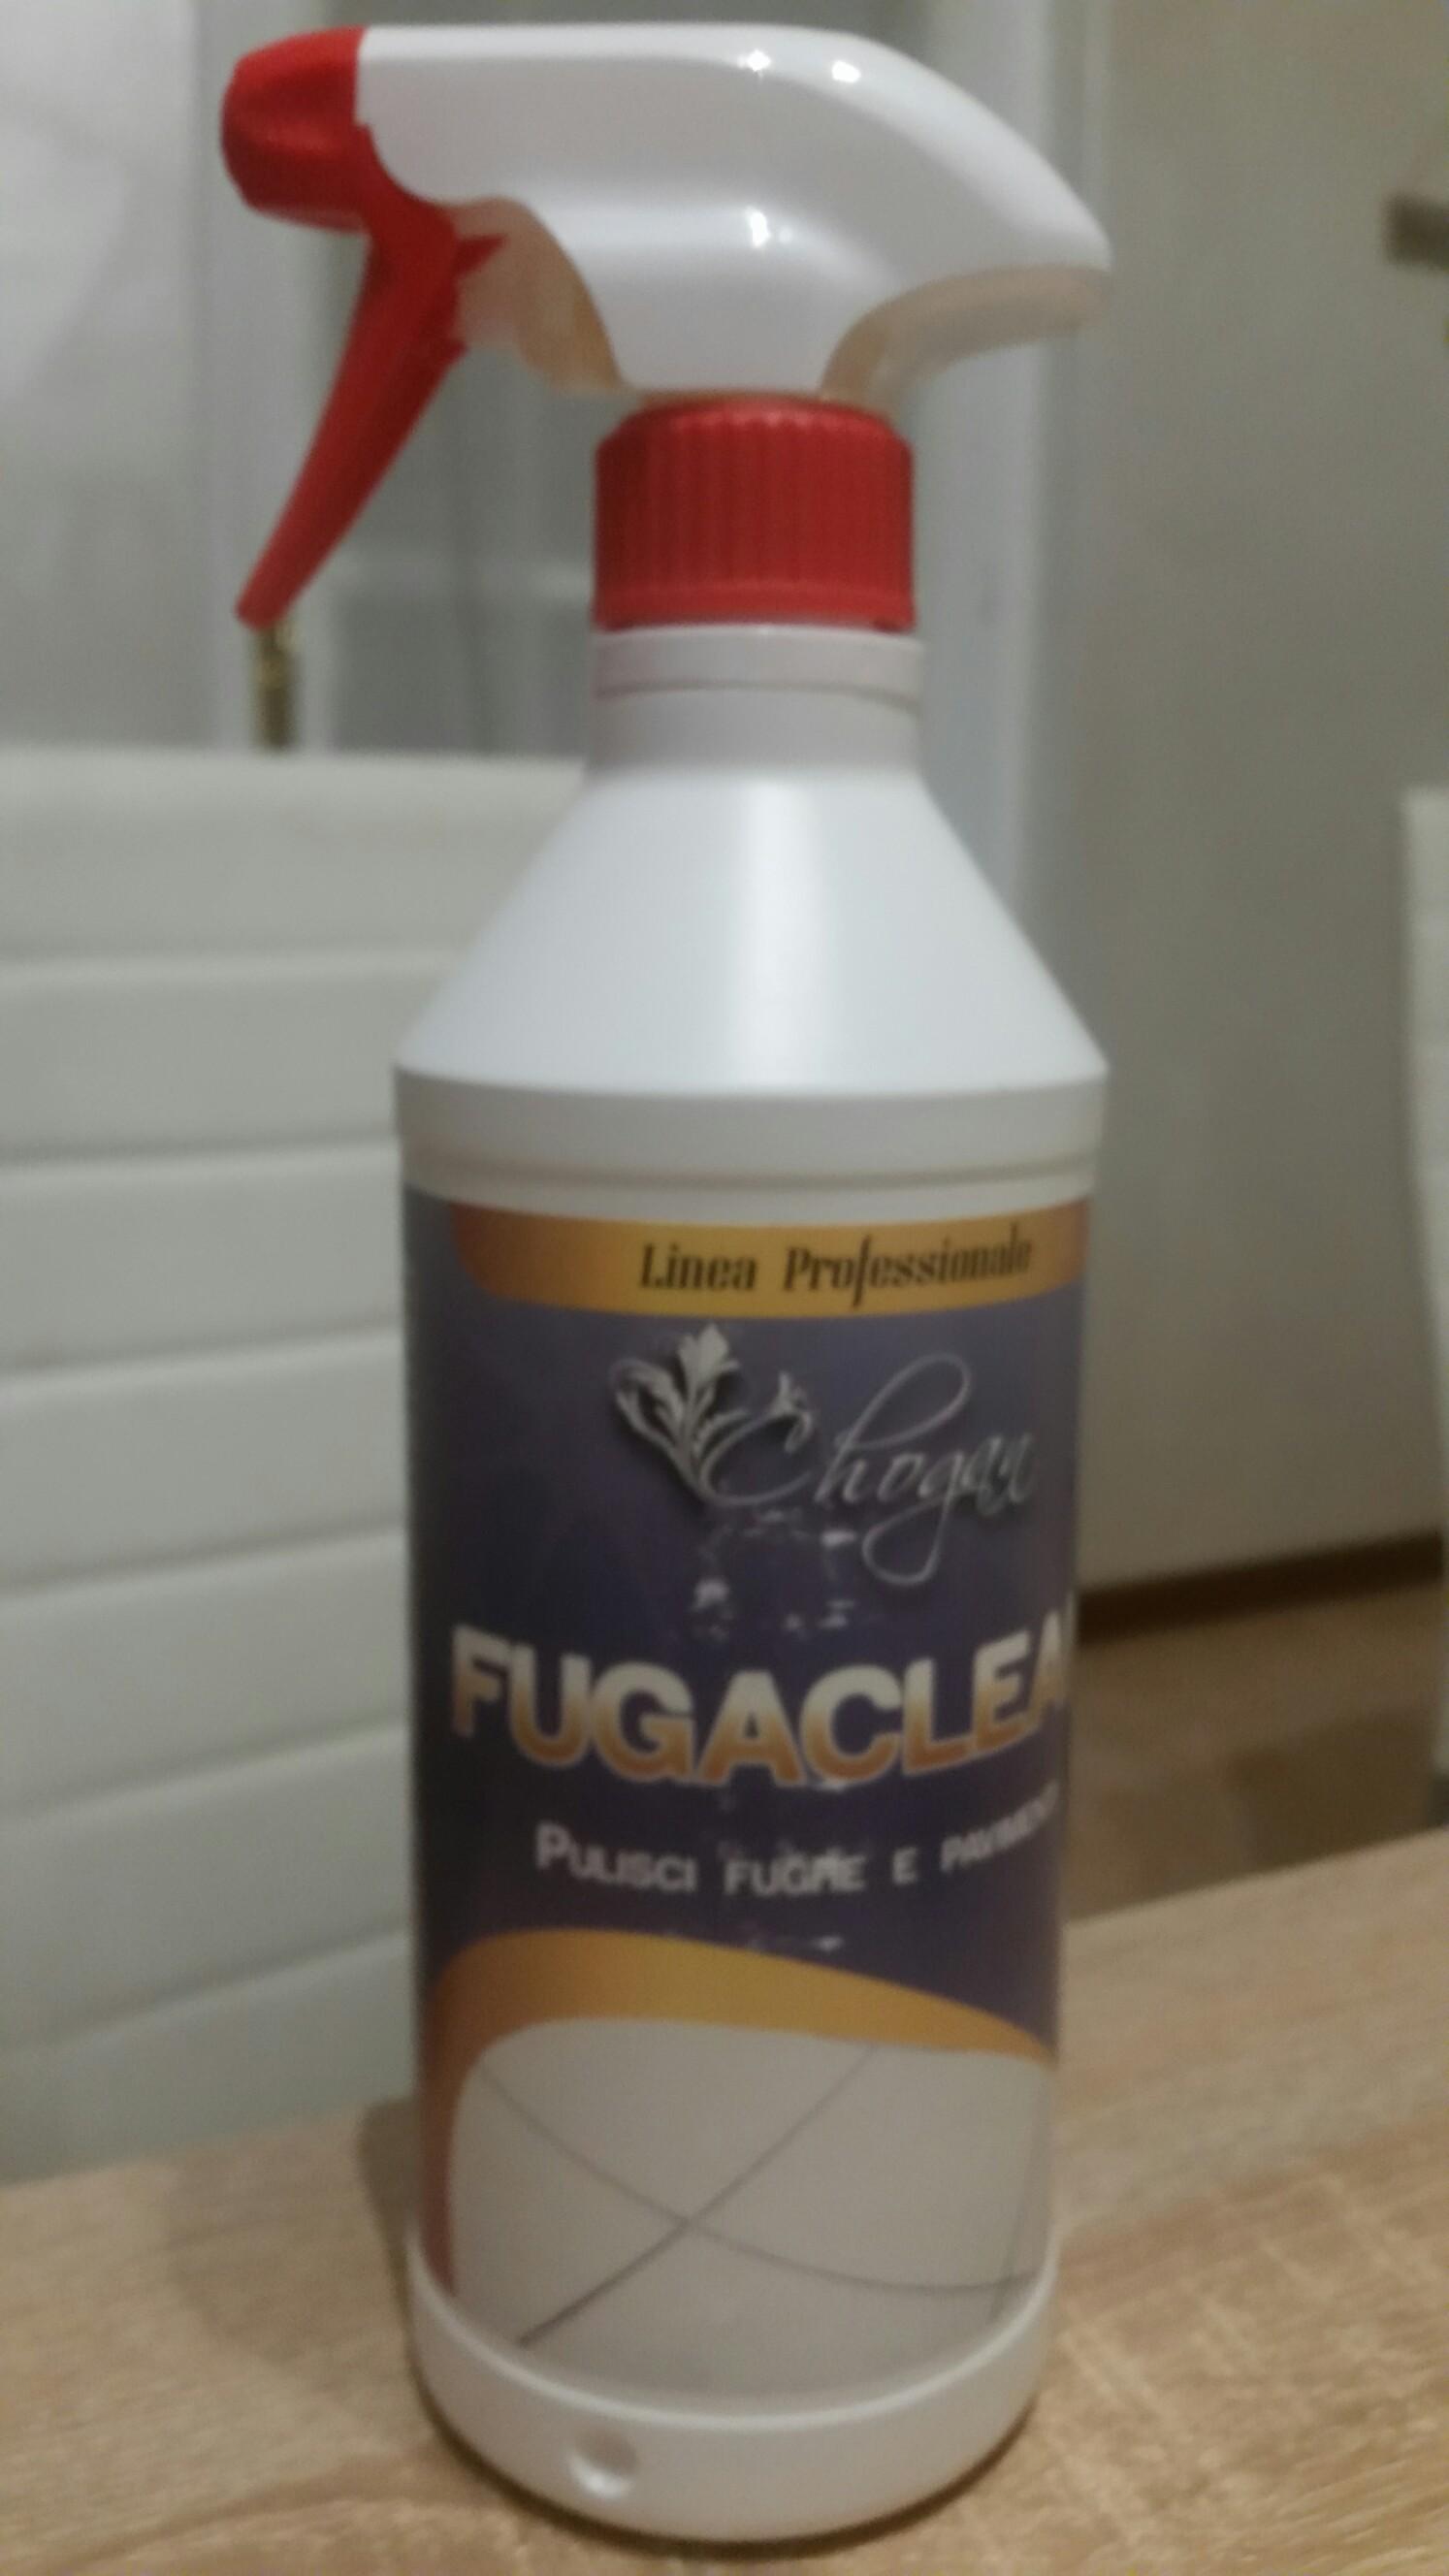 Fugaclean in 25035 Ospitaletto for €12.80 for sale